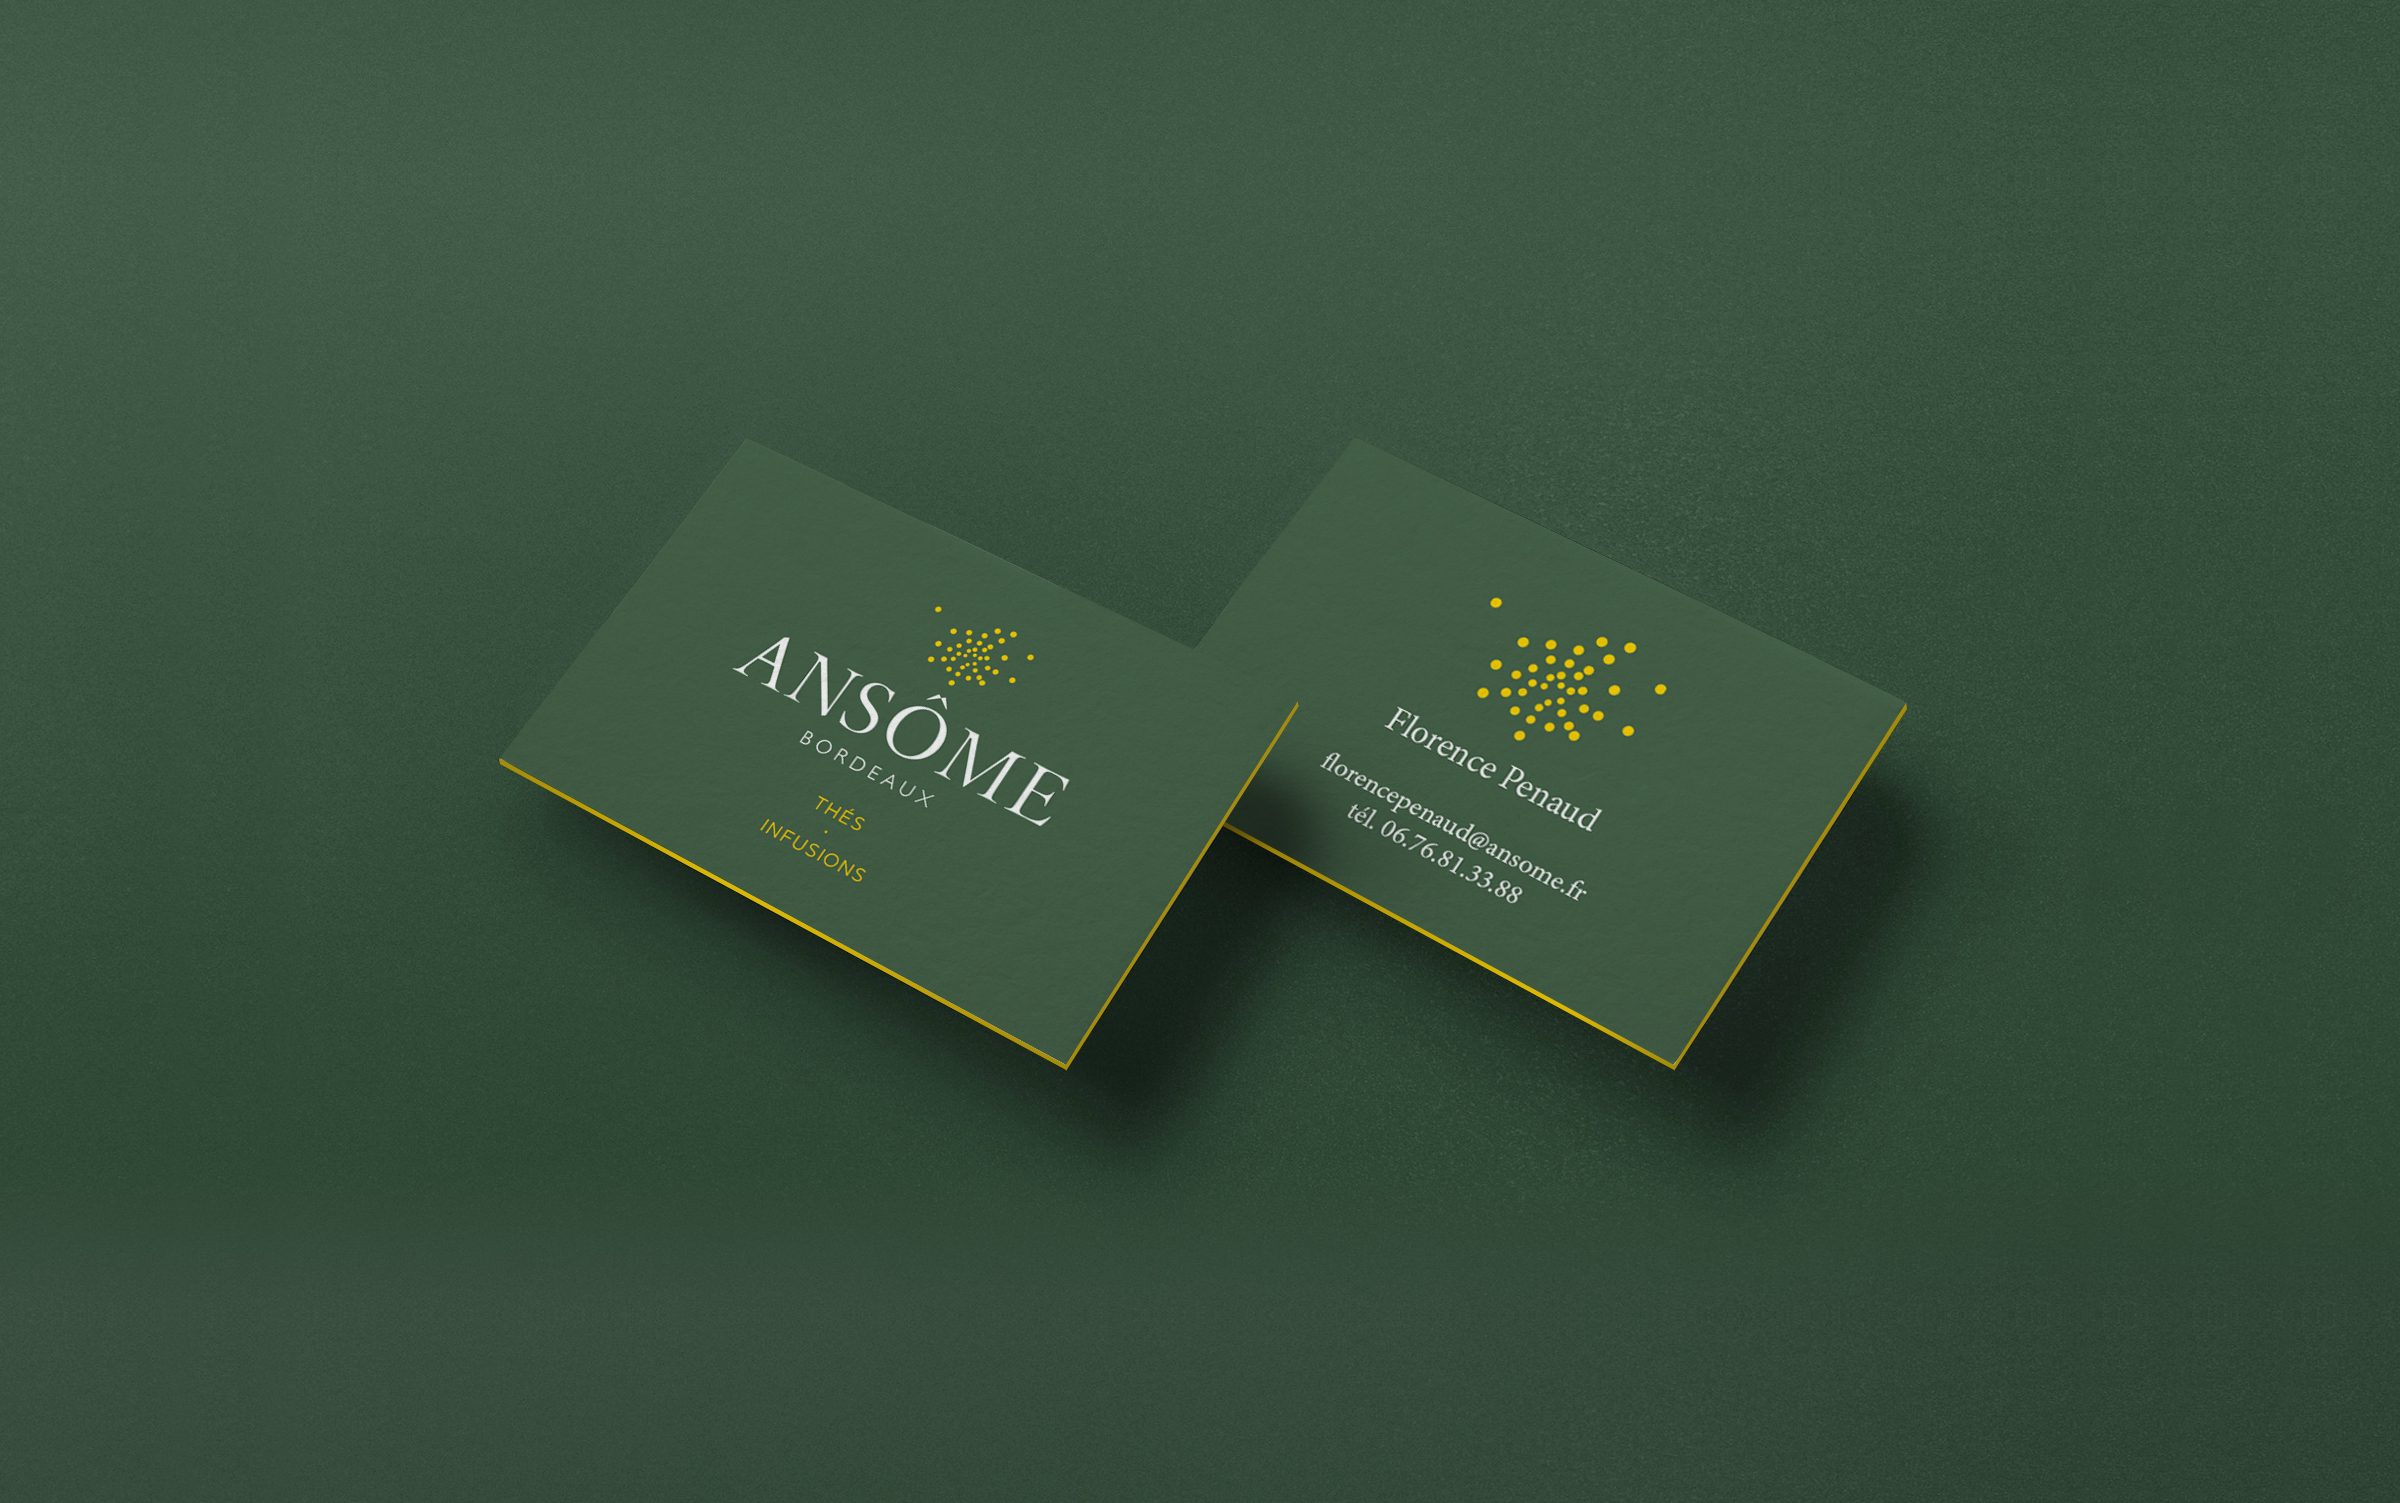 Ansome03